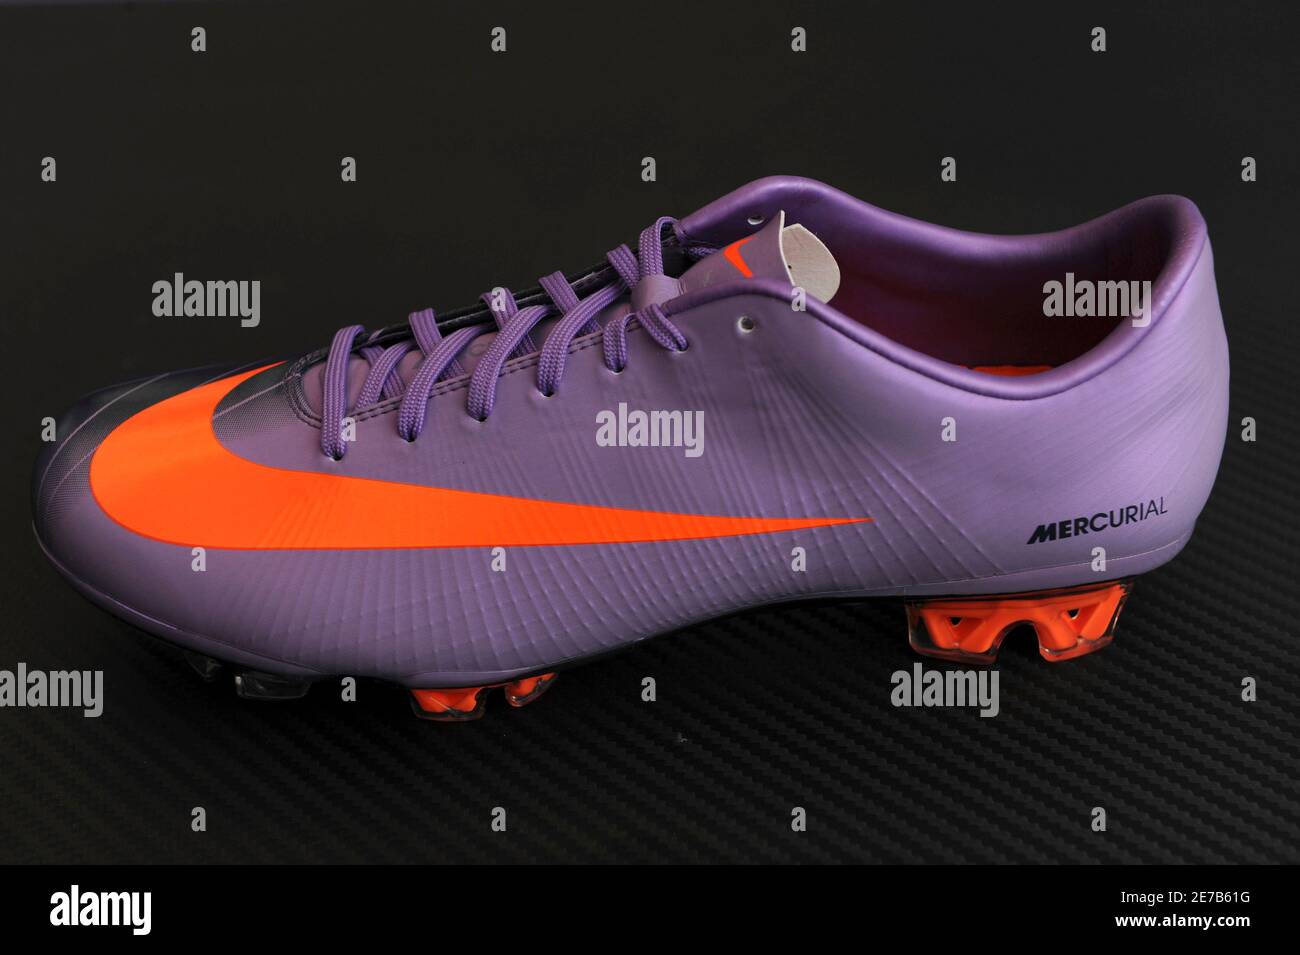 The new Nike Mercurial Vapor SuperFly II soccer boot is displayed during  its launch at an event in London February 24, 2010. REUTERS/Jas Lehal  (BRITAIN - Tags: BUSINESS SPORT SOCCER Stock Photo - Alamy